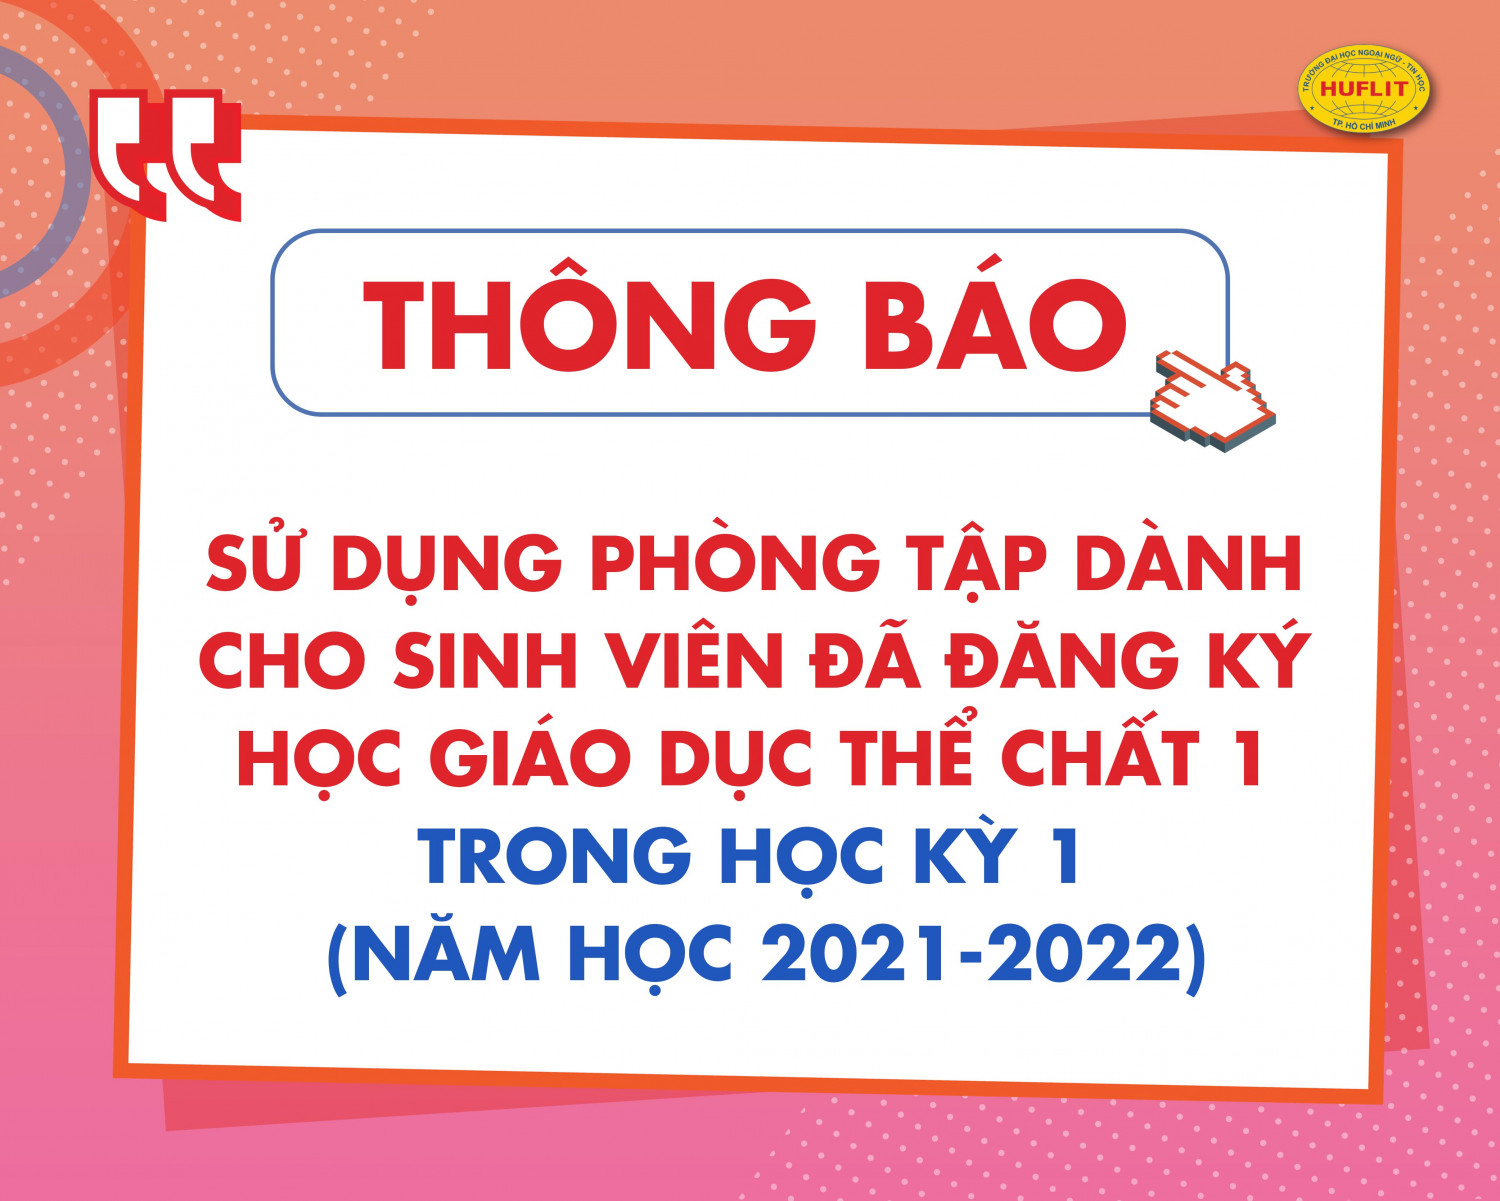 24.2.2022 su dung phong tap danh cho sv da dky hoc gdtc1